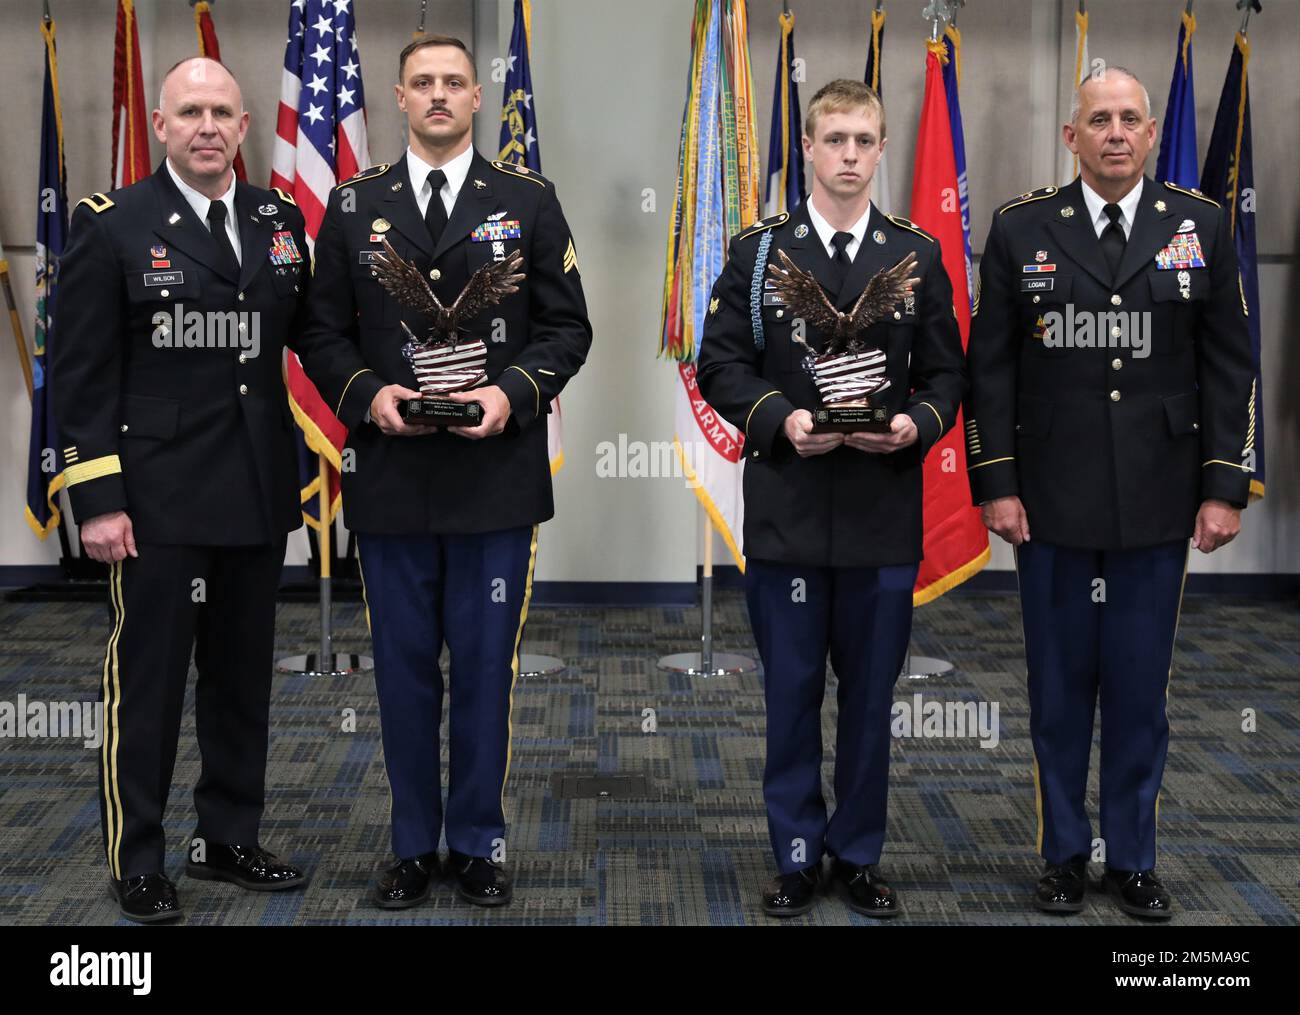 U.S. Army Brig. Gen. Dwayne Wilson (far left), commanding general of the Georgia Army National Guard, and Command Sgt. Maj. Jeff Logan (far right), state command sergeant major of the Georgia Army National Guard, present trophies to Sgt. Matthew Fiore (center left) and Spc. Keenan Baxter (center right) March 25, 2022, at Clay National Guard Center in Marietta, Georgia. Fiore won the 2022 Georgia Army National Guard State Best Noncommissioned Officer and Baxter won the title of State Best Warrior. Stock Photo